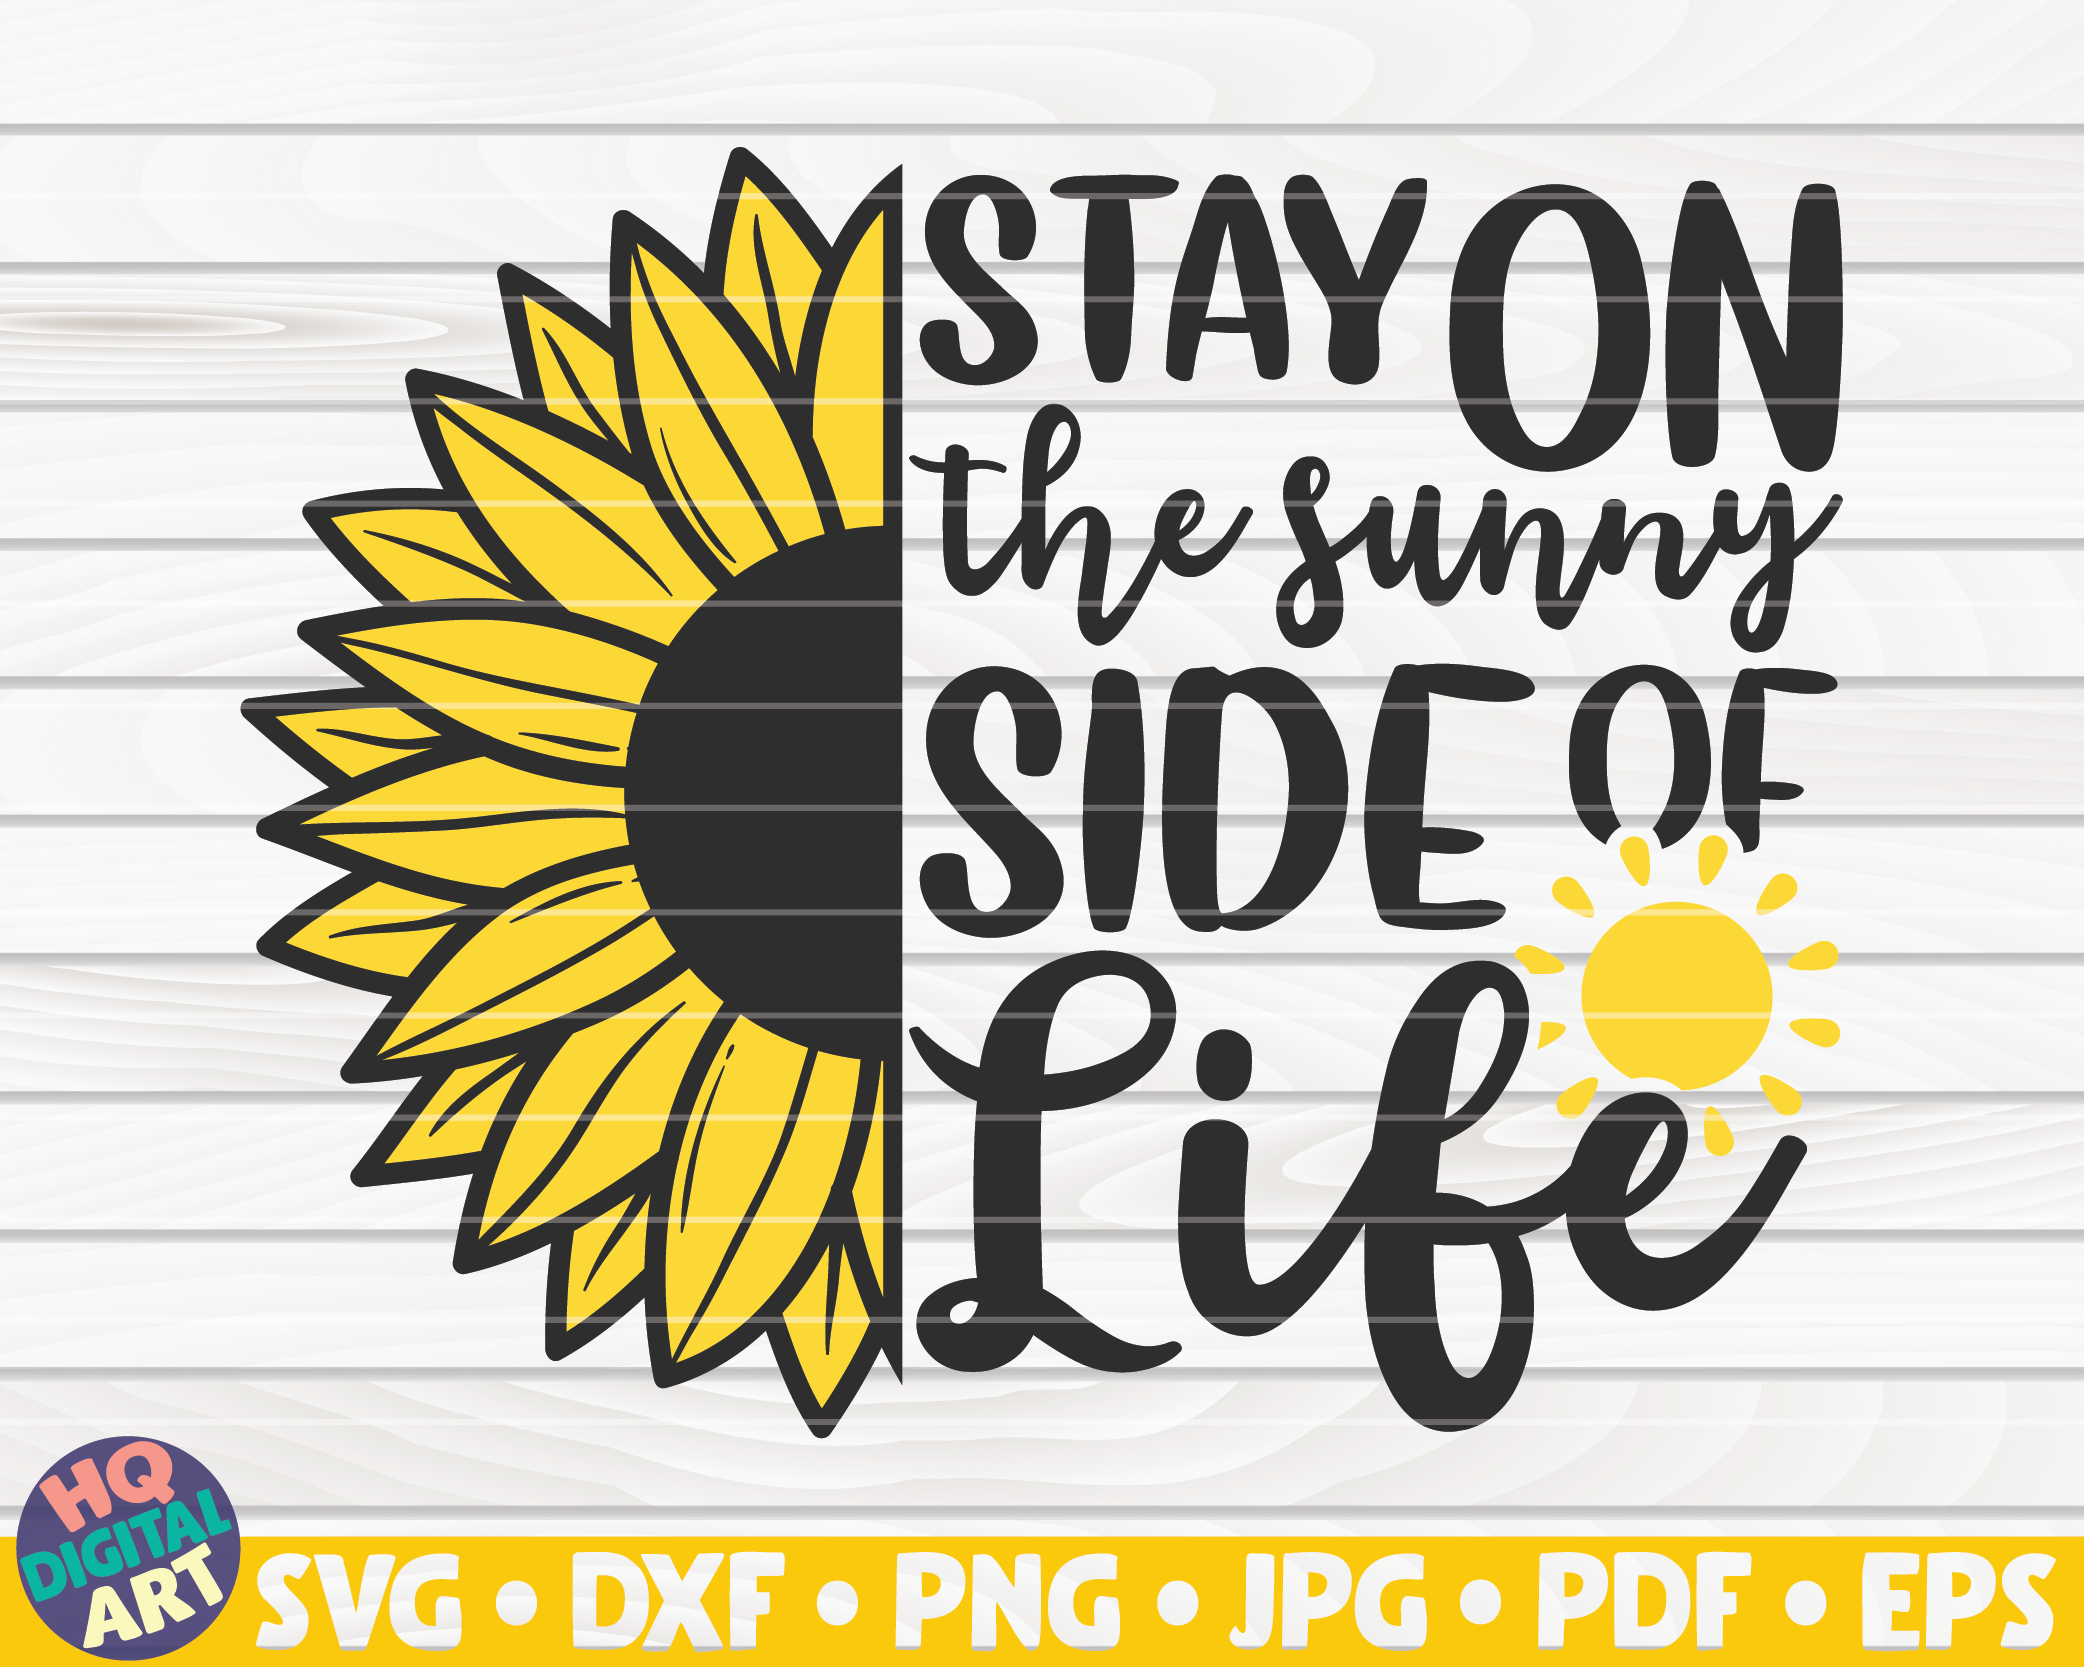 Stay on the sunny side of life SVG | Sunflower quote SVG By